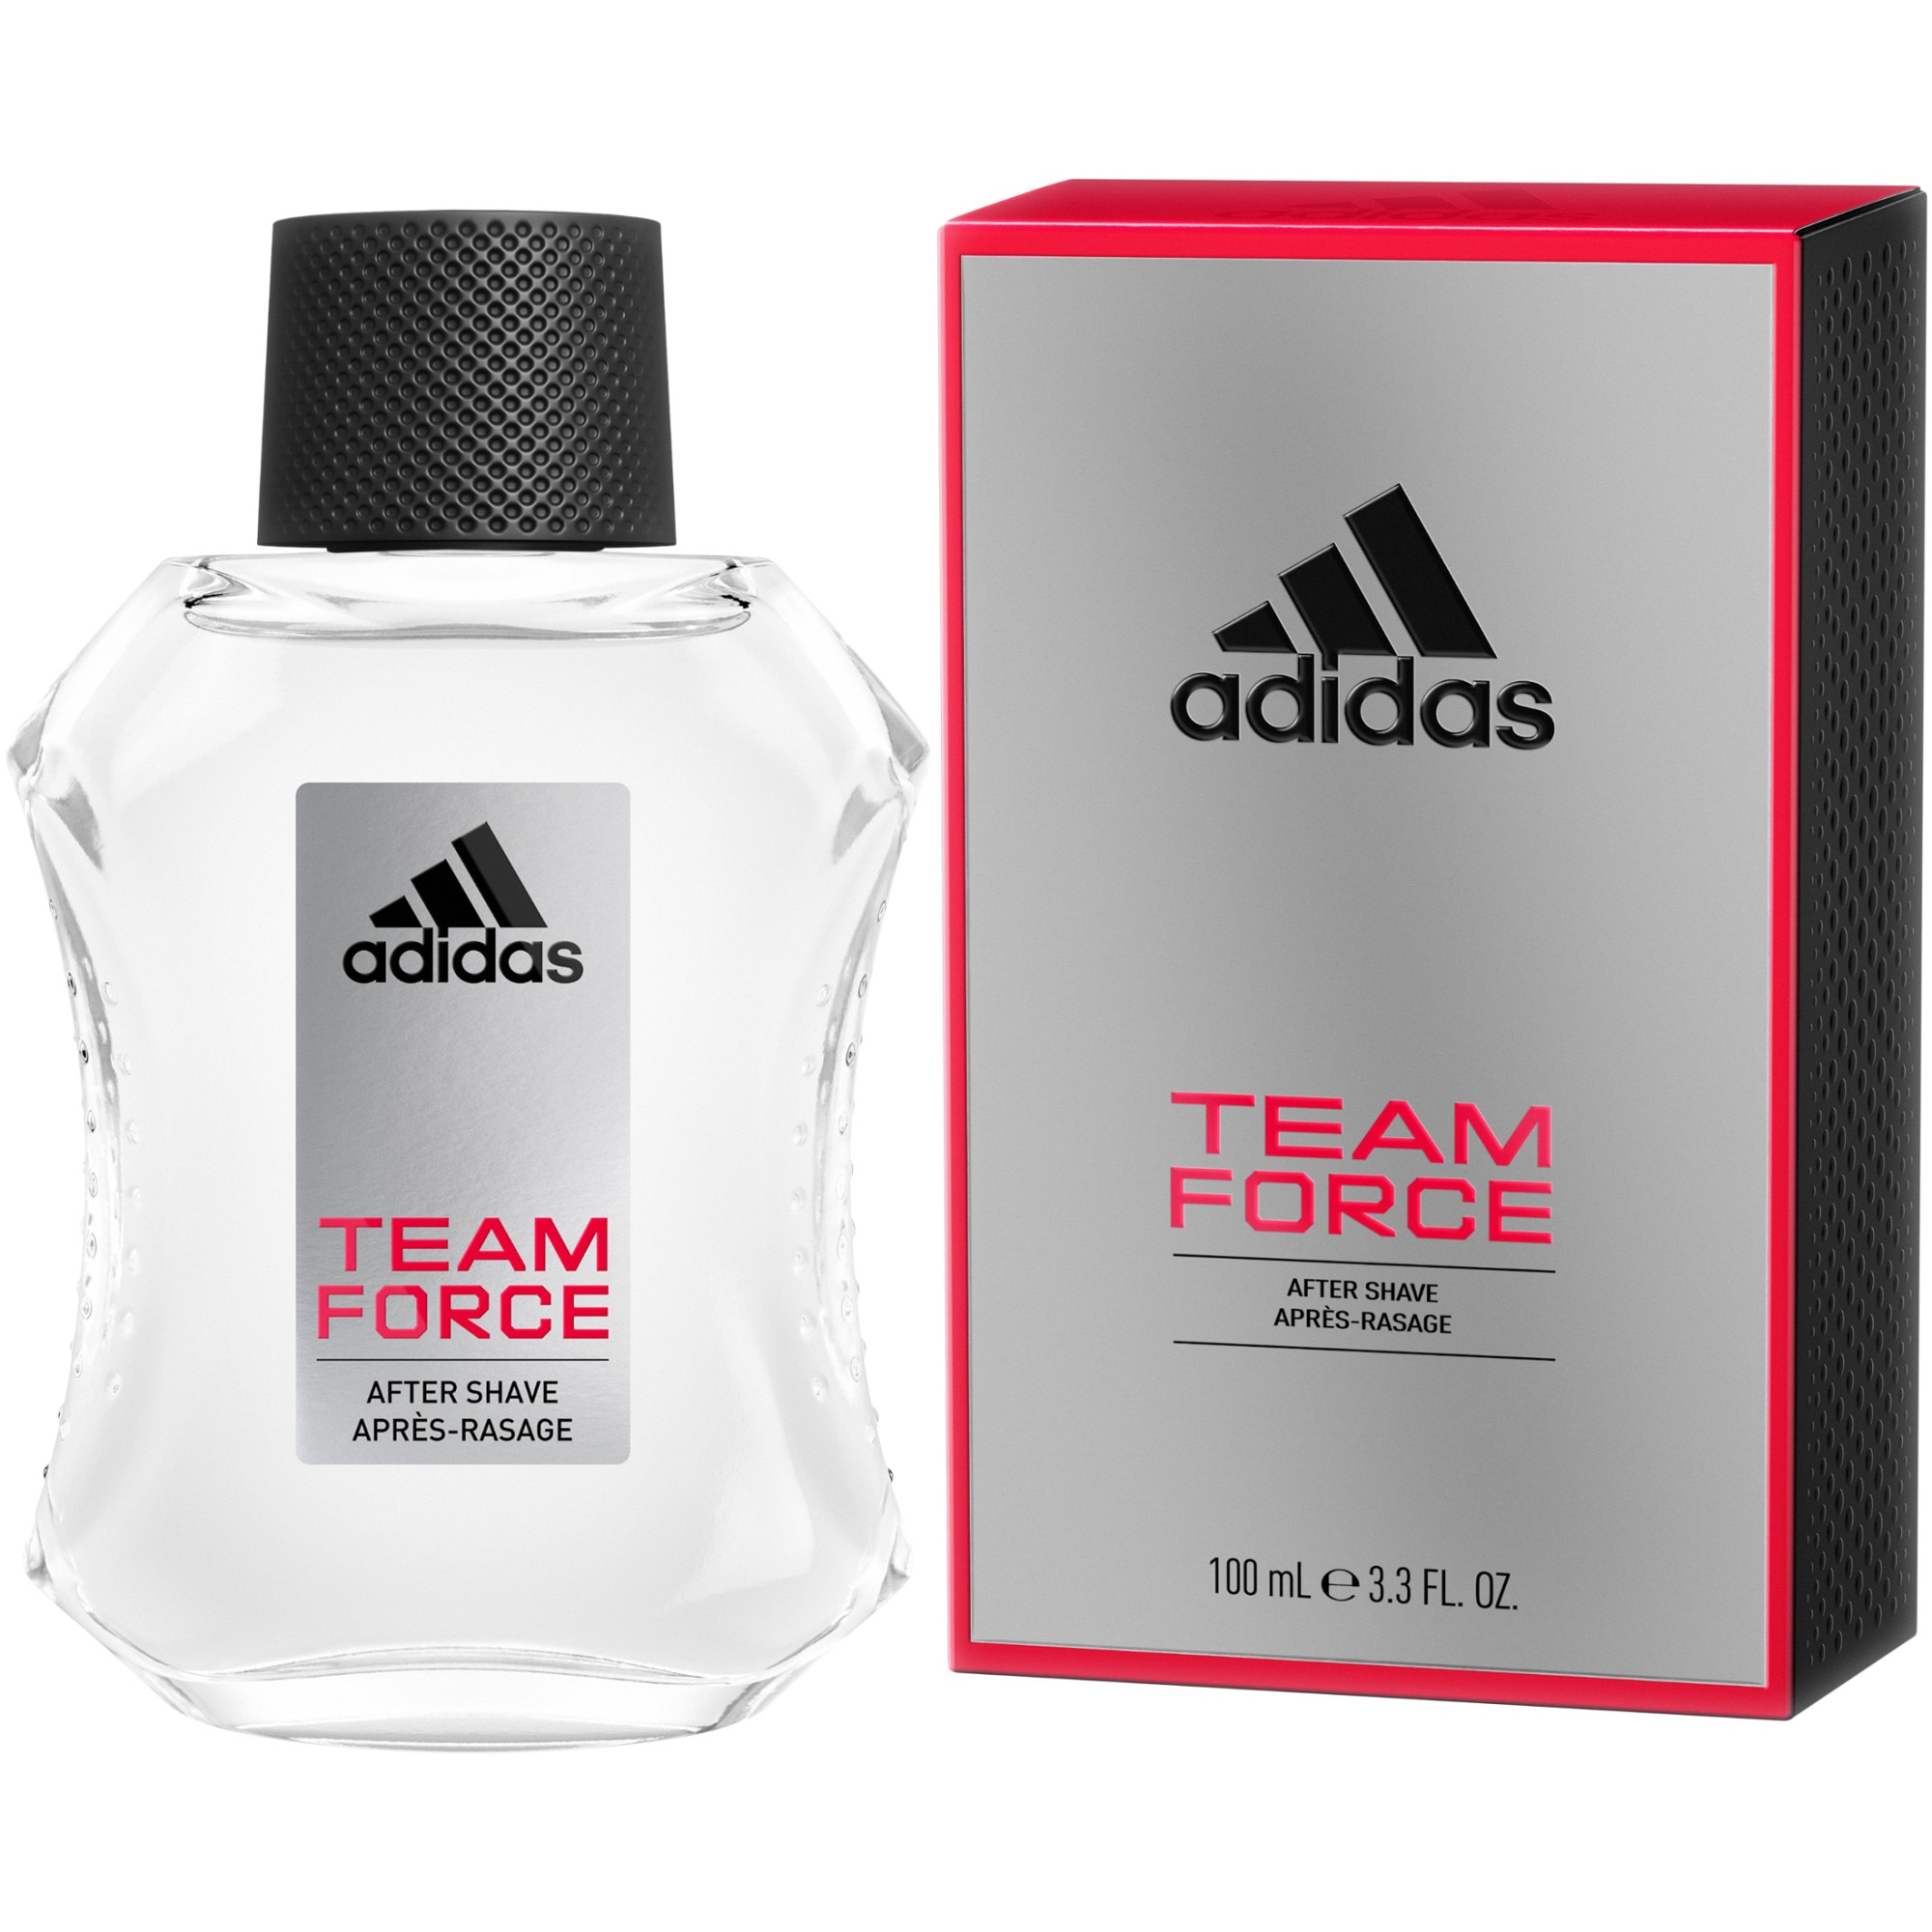 Infect Expressly priority After shave Adidas Team Force, Barbati, 100 ml - eMAG.ro